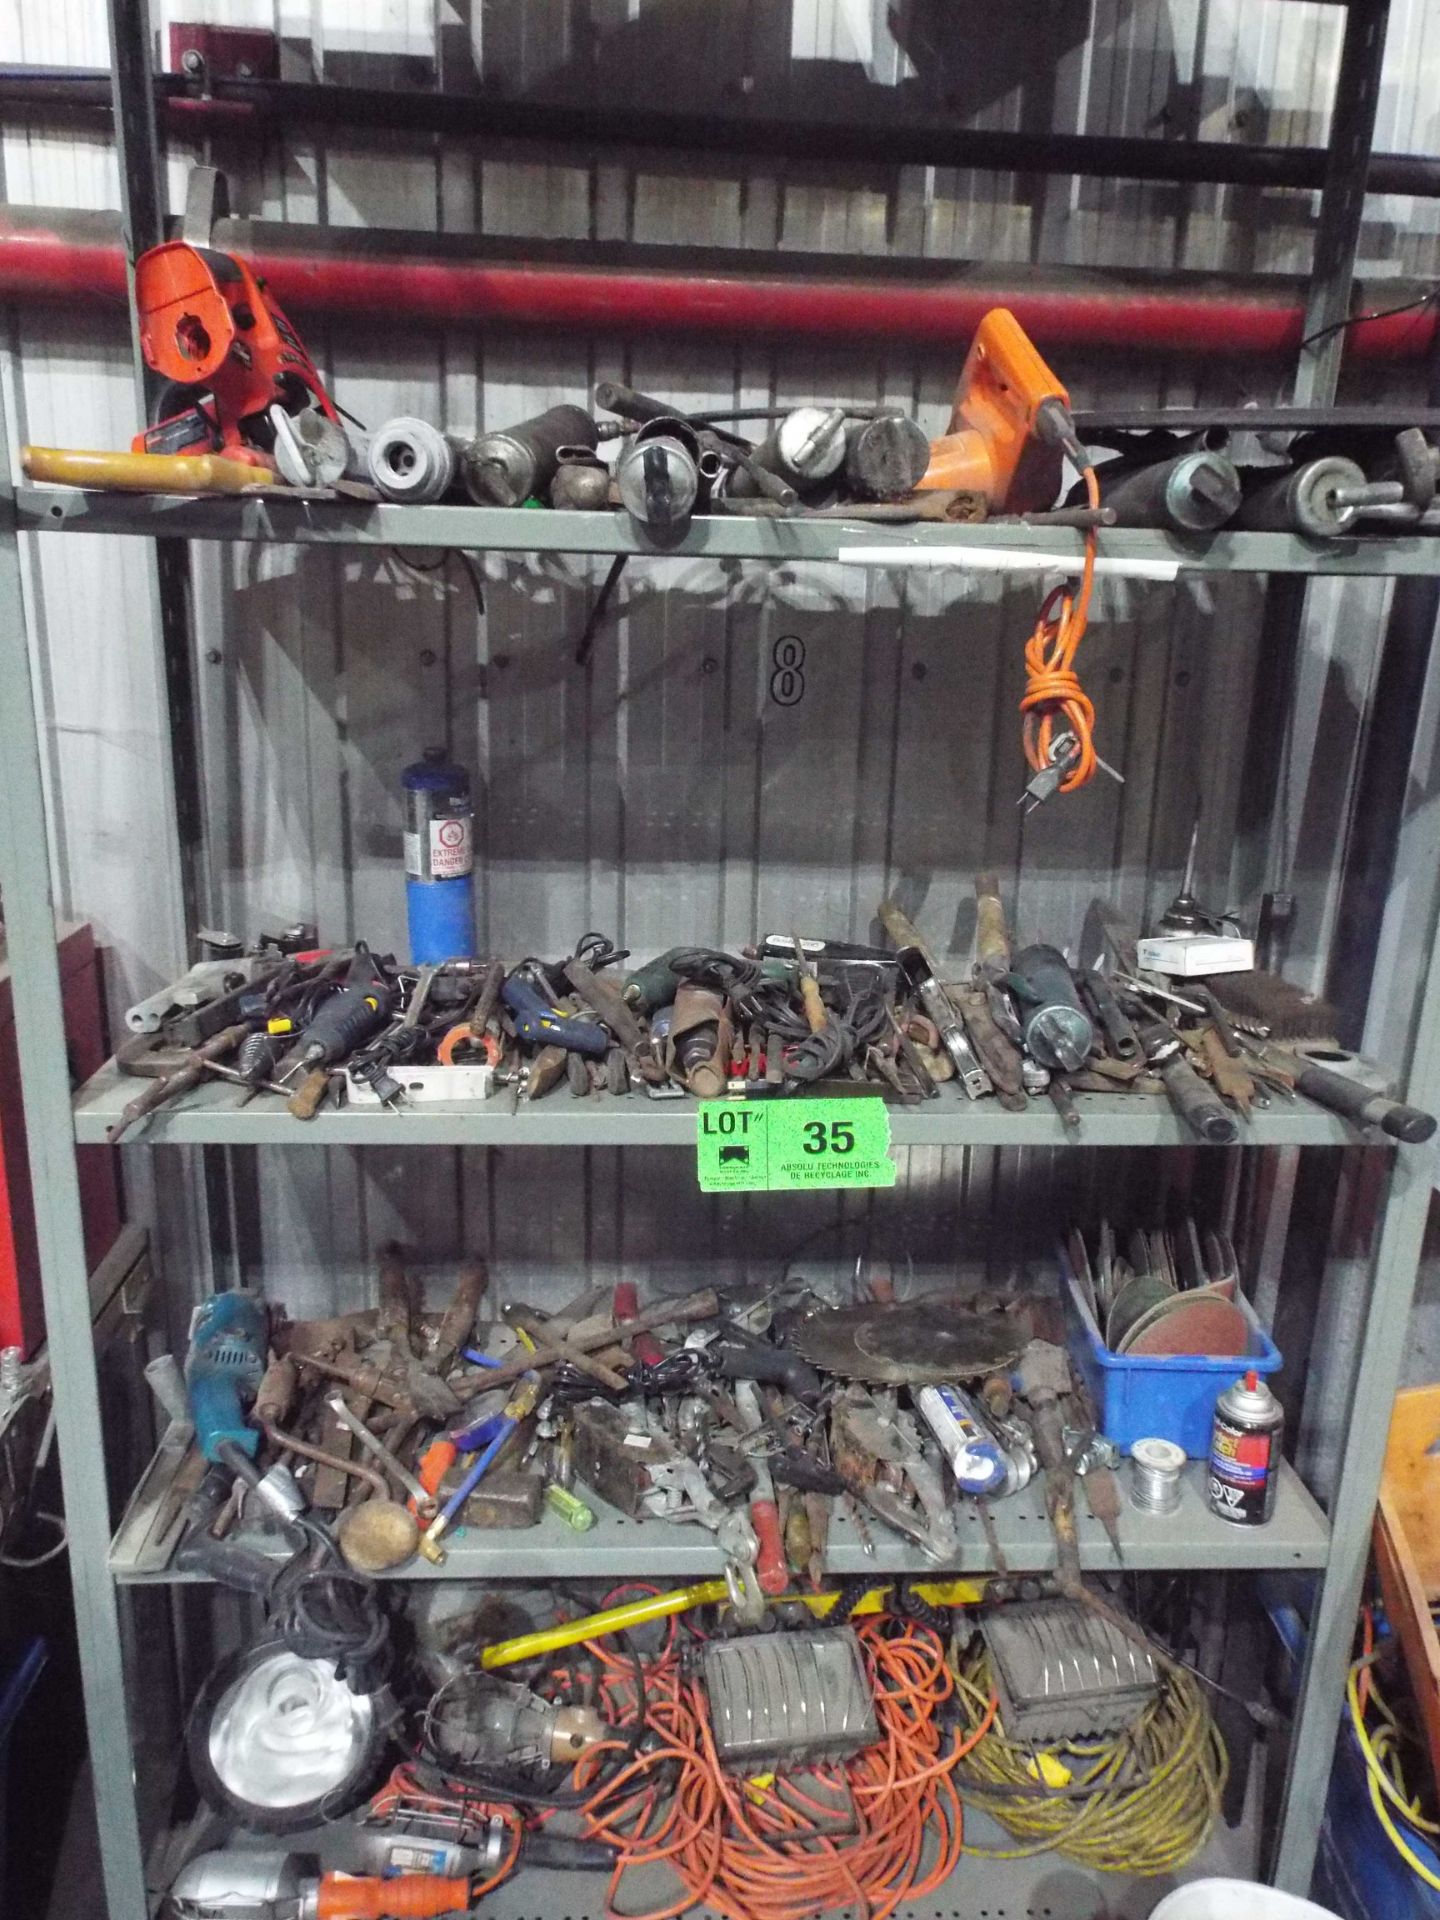 (LOT) ASSORTED TOOLS, LIGHTS, AND EXTENSION CORDS WITH SHELF